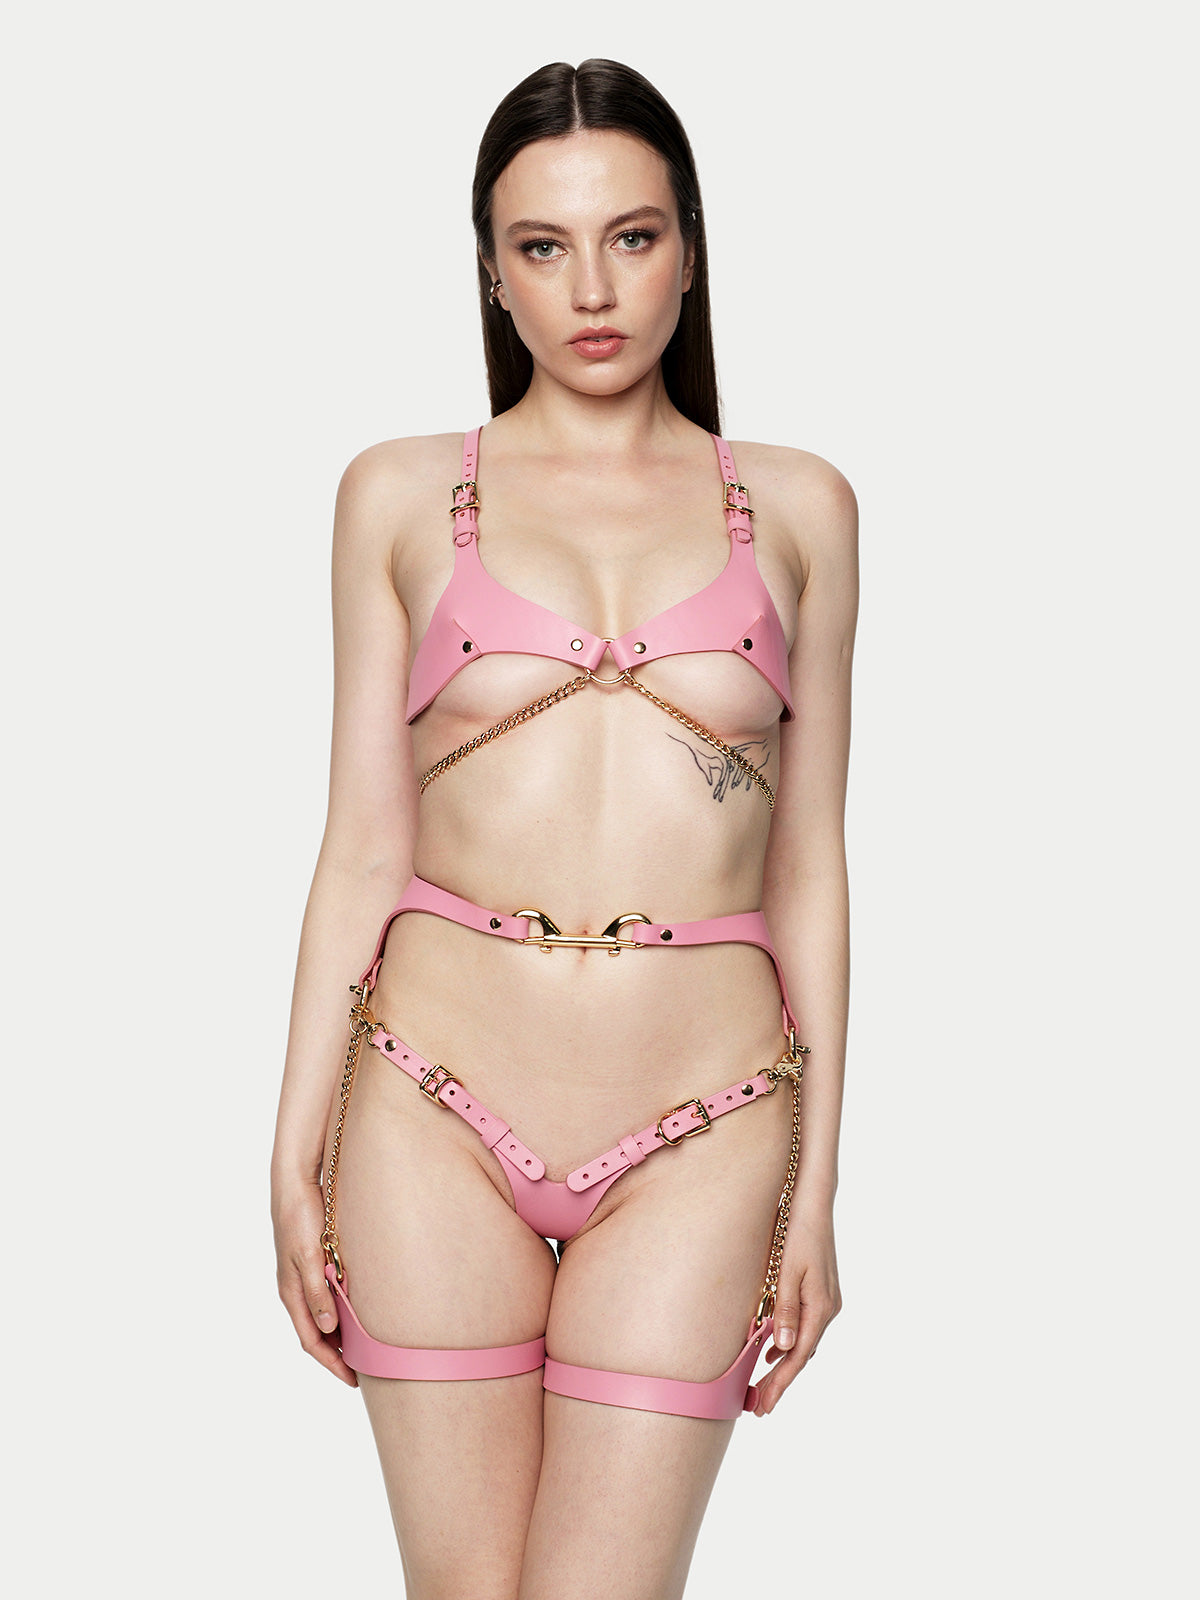 Cardi Bra and Garters Leather Set in Pink